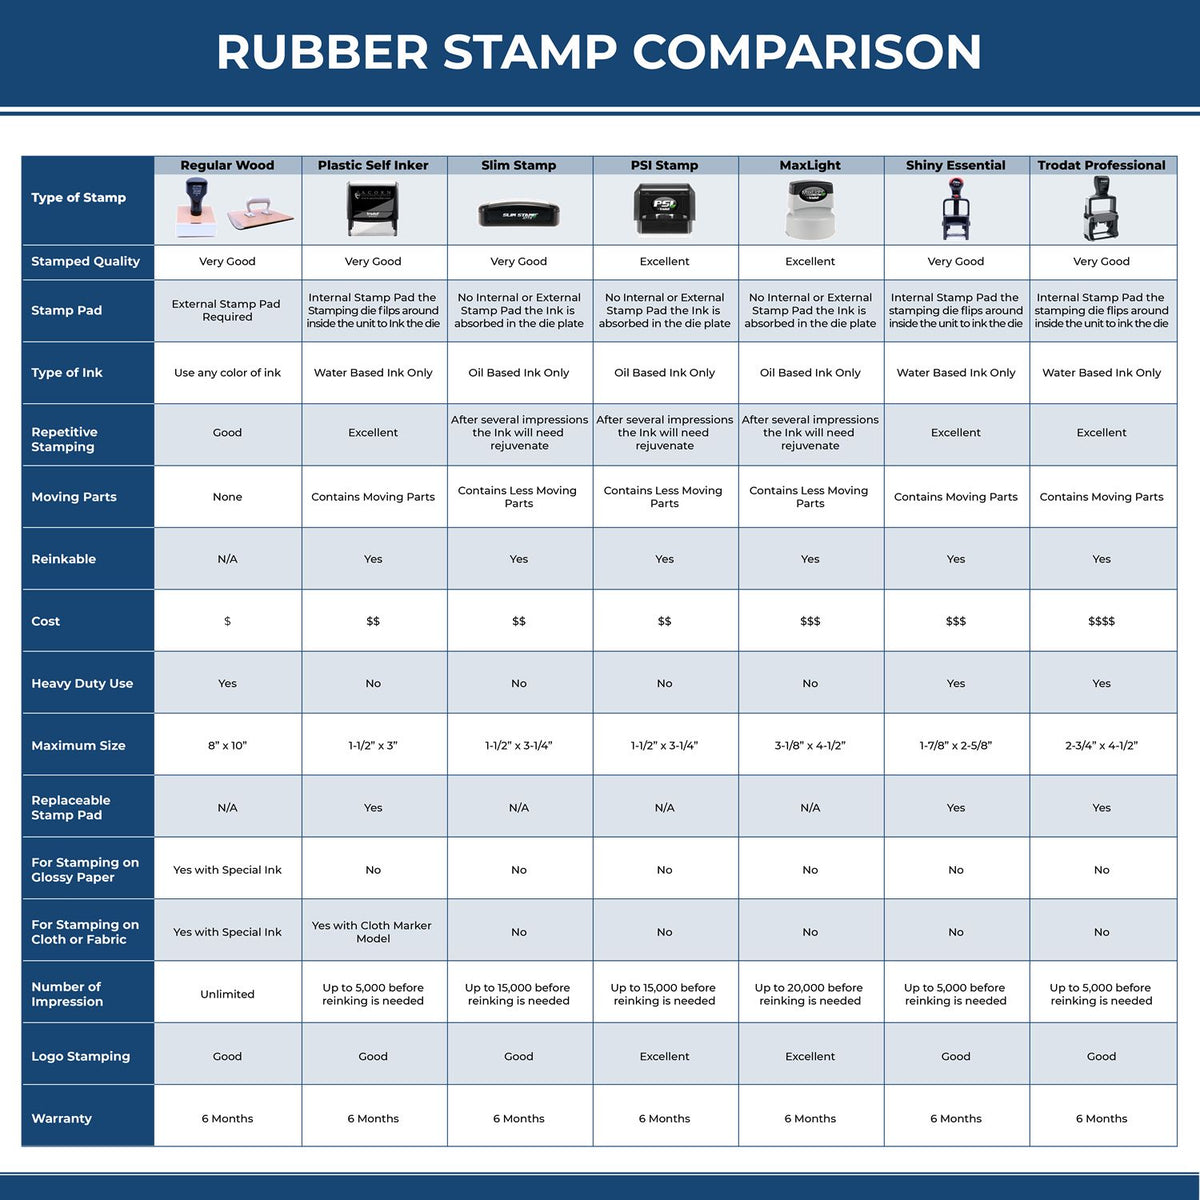 A comparison chart for the different types of mount models available for the Self-Inking New York PE Stamp.